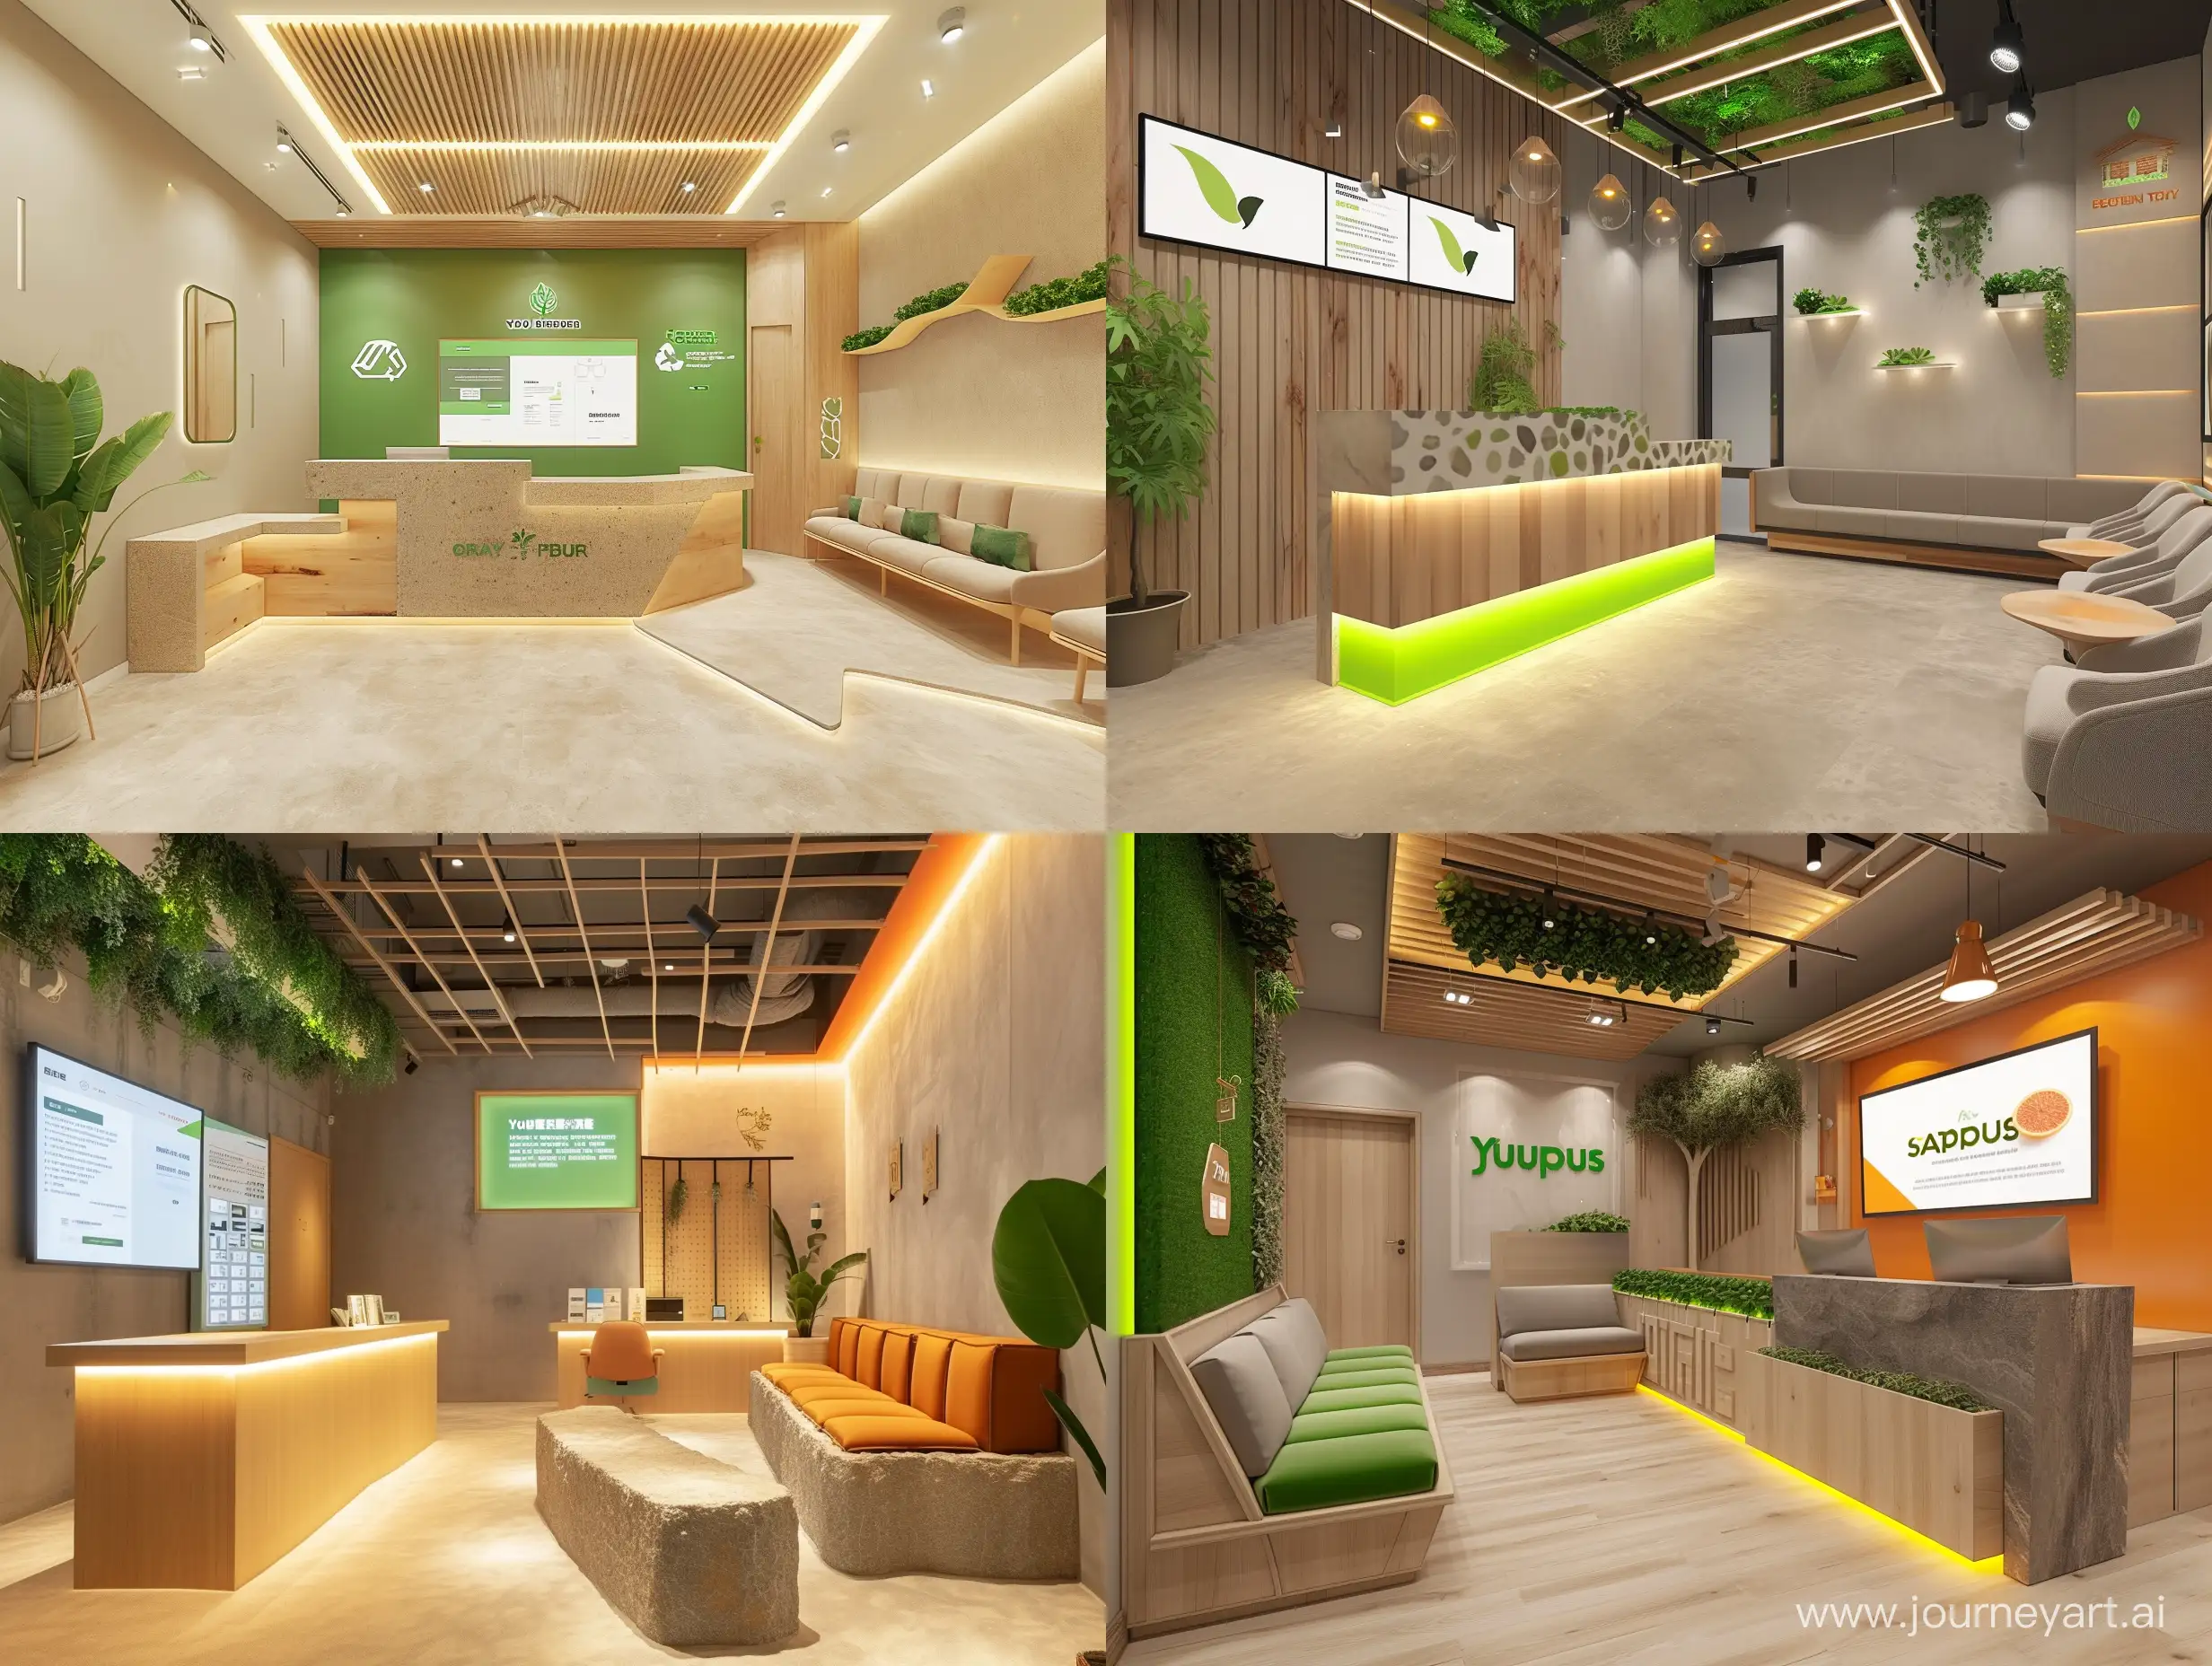 imagine an image of Entrance Area (4.5 sqm) of kids chair showroom : You are greeted by an elegantly understated reception area. Neutral tones are accented by lively greens, complementing a desk crafted from recycled wood and stone. Overhead, warm LED lights cast a welcoming glow, focusing on digital signage that narrates the brand's commitment to sustainability. The seating area features plush, eco-friendly upholstery, inviting visitors to immerse themselves in the brand's story.realistic interior style